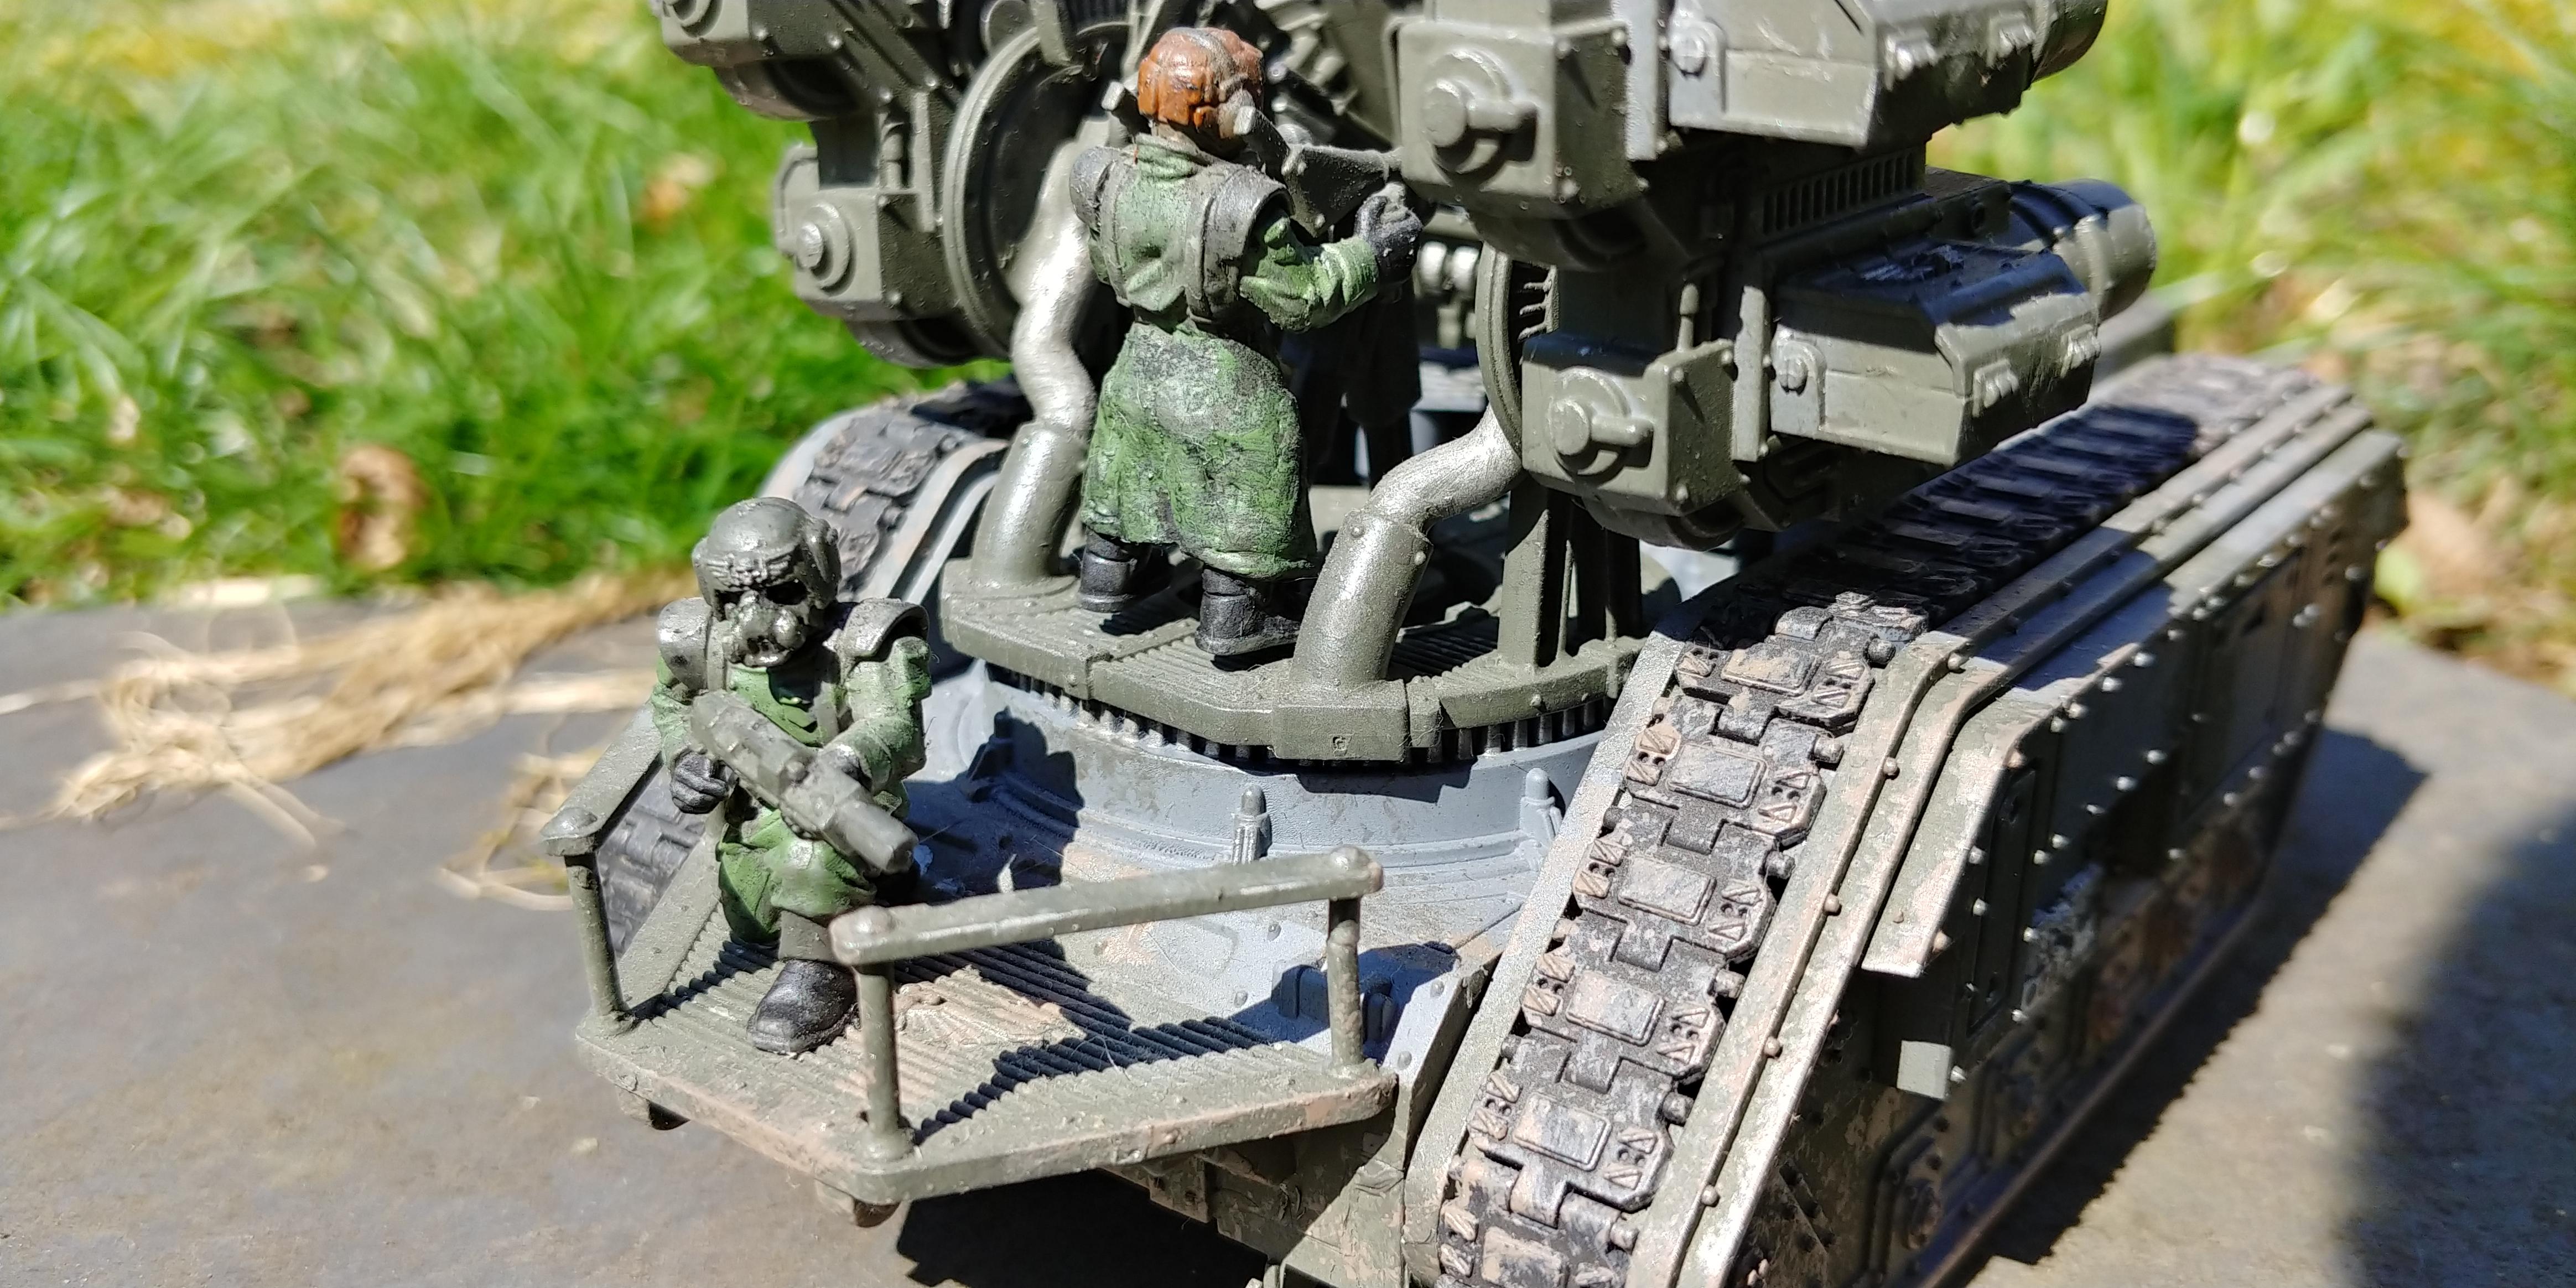 508th, Am, Artillery, Astra Militarum, Came, Heavy Support, Imperial Guard, Tank, Urban, Wyvern